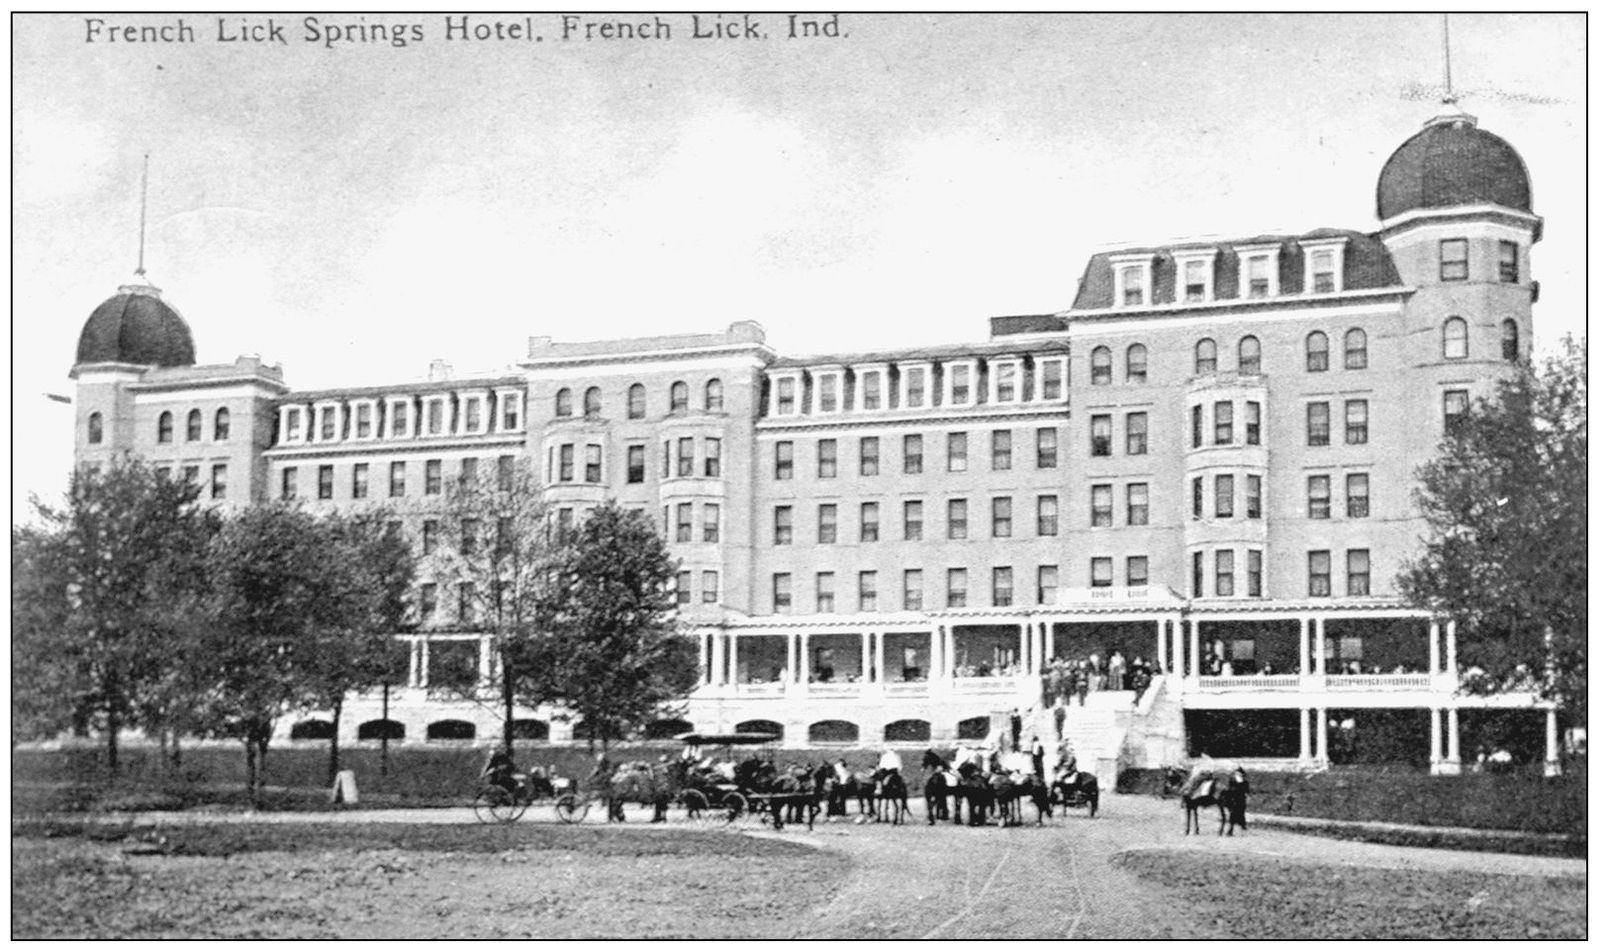 For many years the French Lick Springs Hotel was the site of many large - photo 5